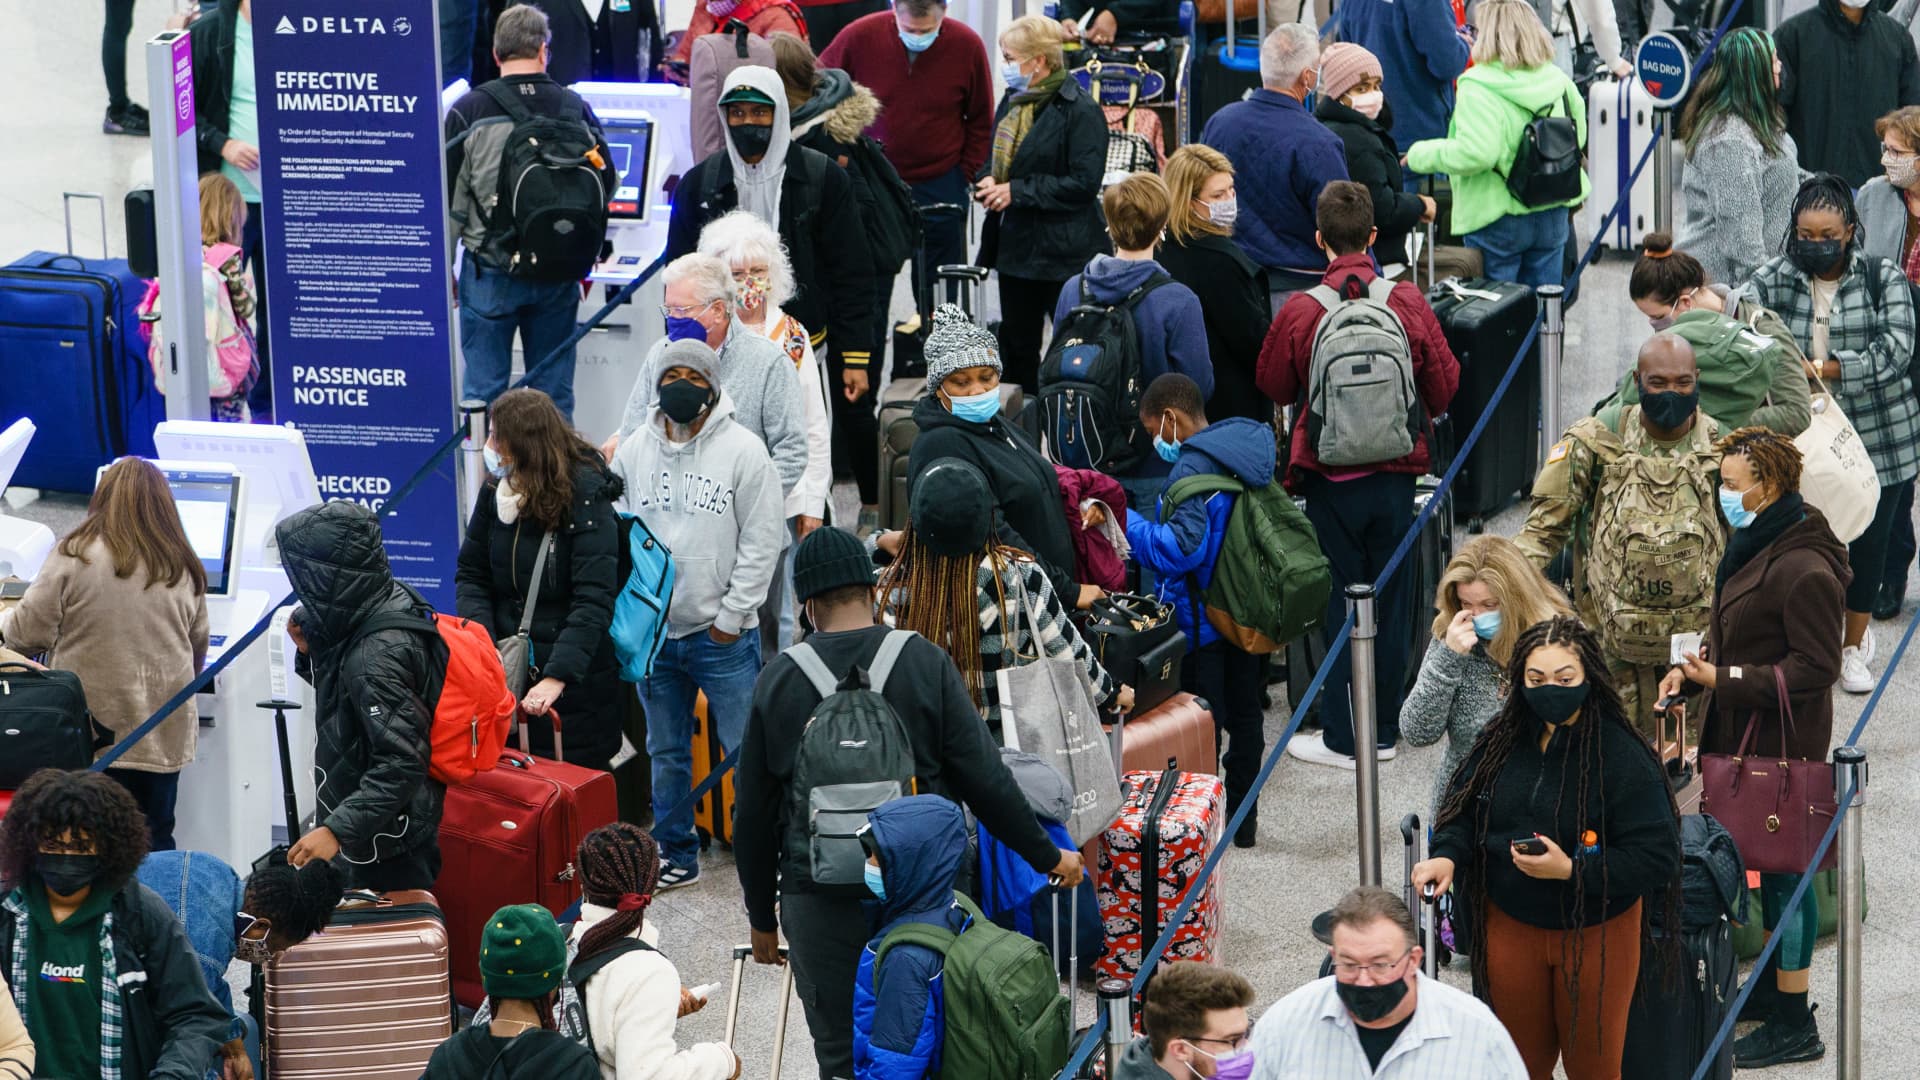 Airfare surged 20% over pre-pandemic levels in March as inflation hit vacations